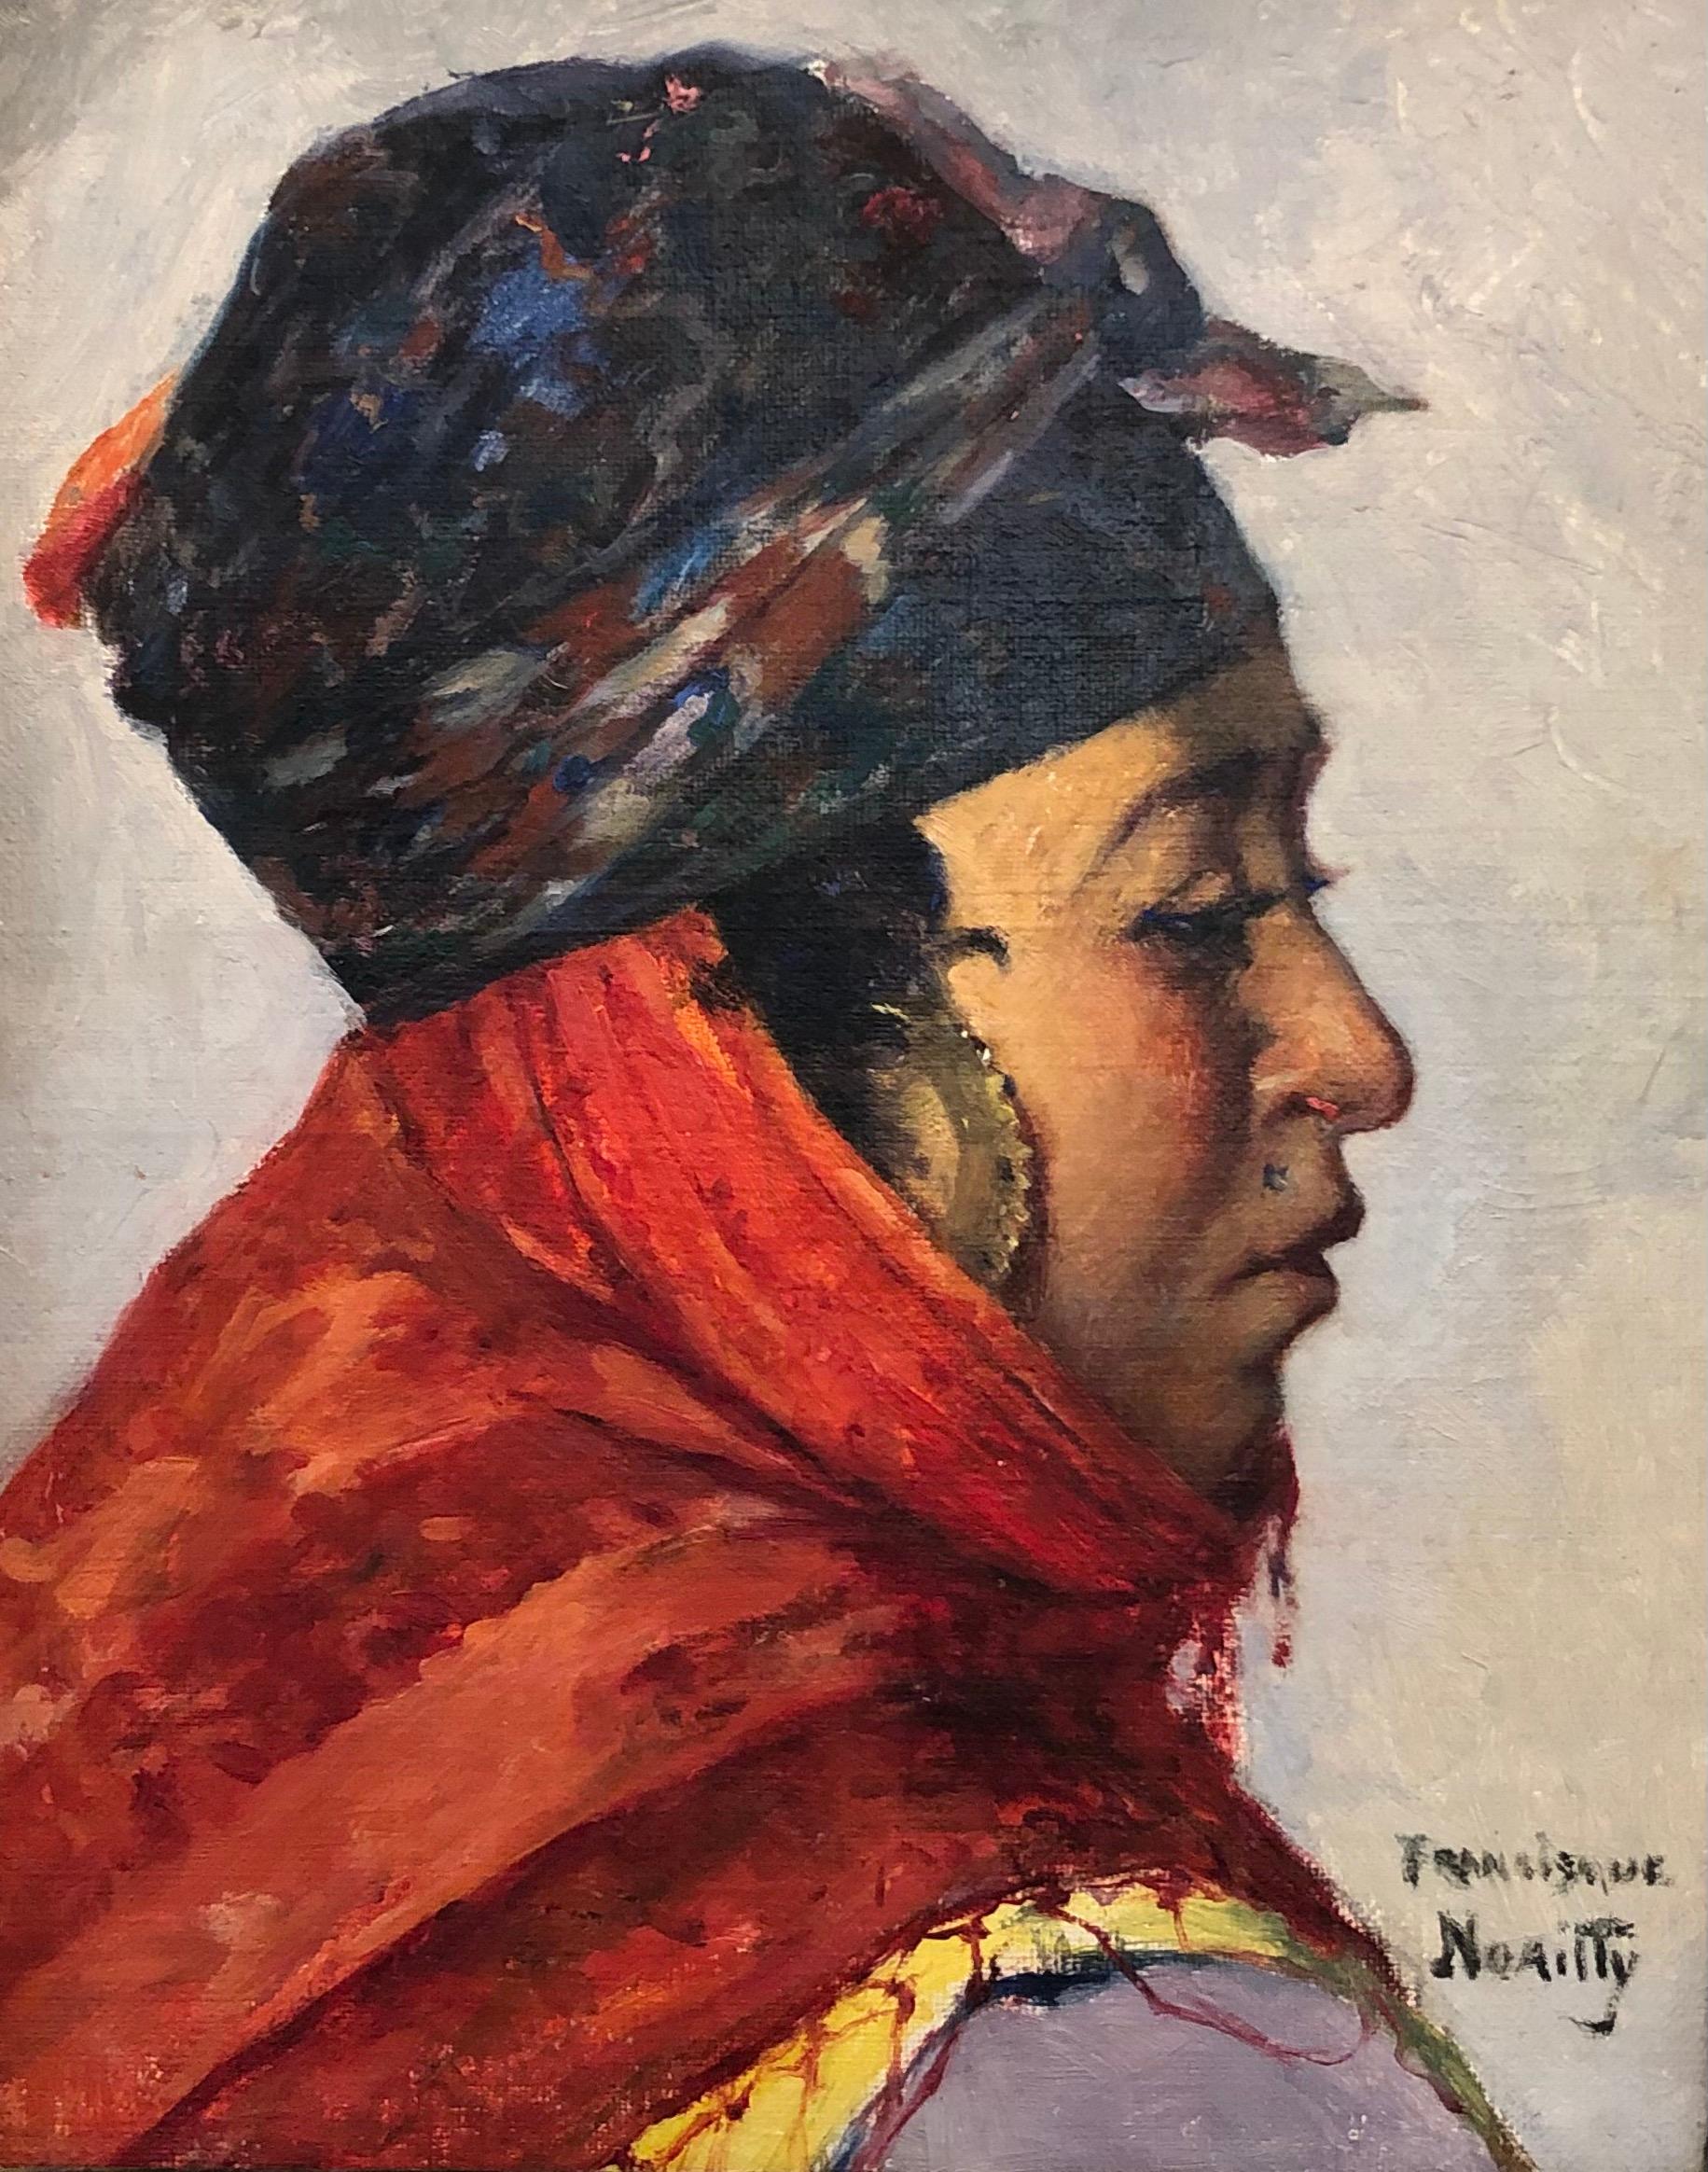 Francisque Noailly Portrait Painting - North African woman